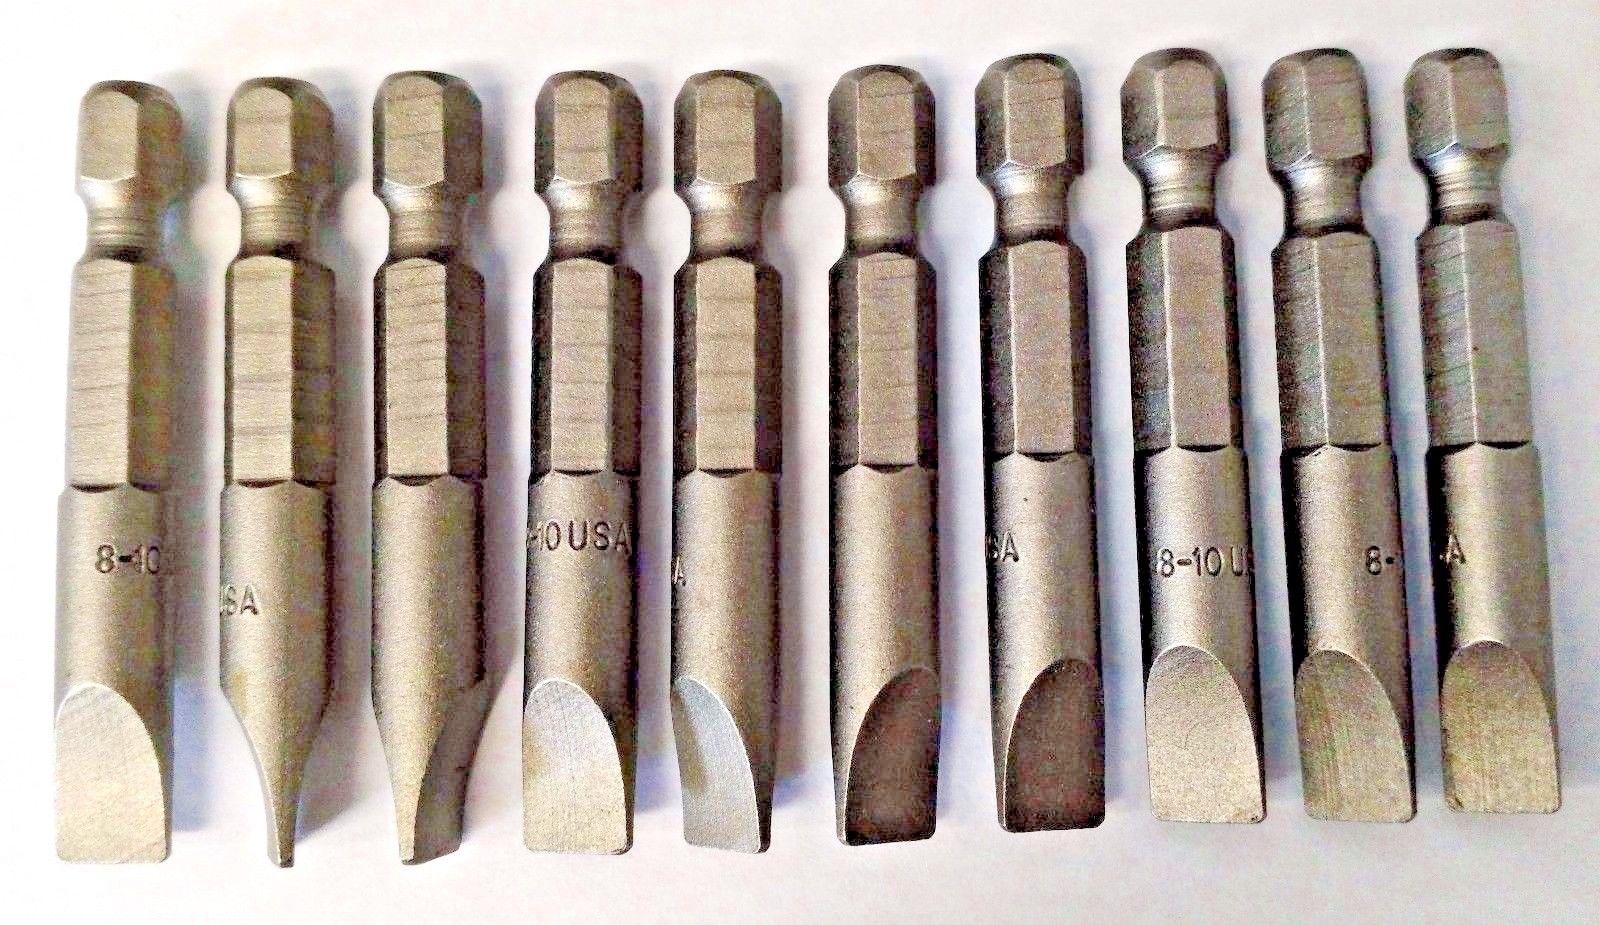 Bosch 3AE71 8-10 Slotted Screw Tips (2) 5 Packs USA